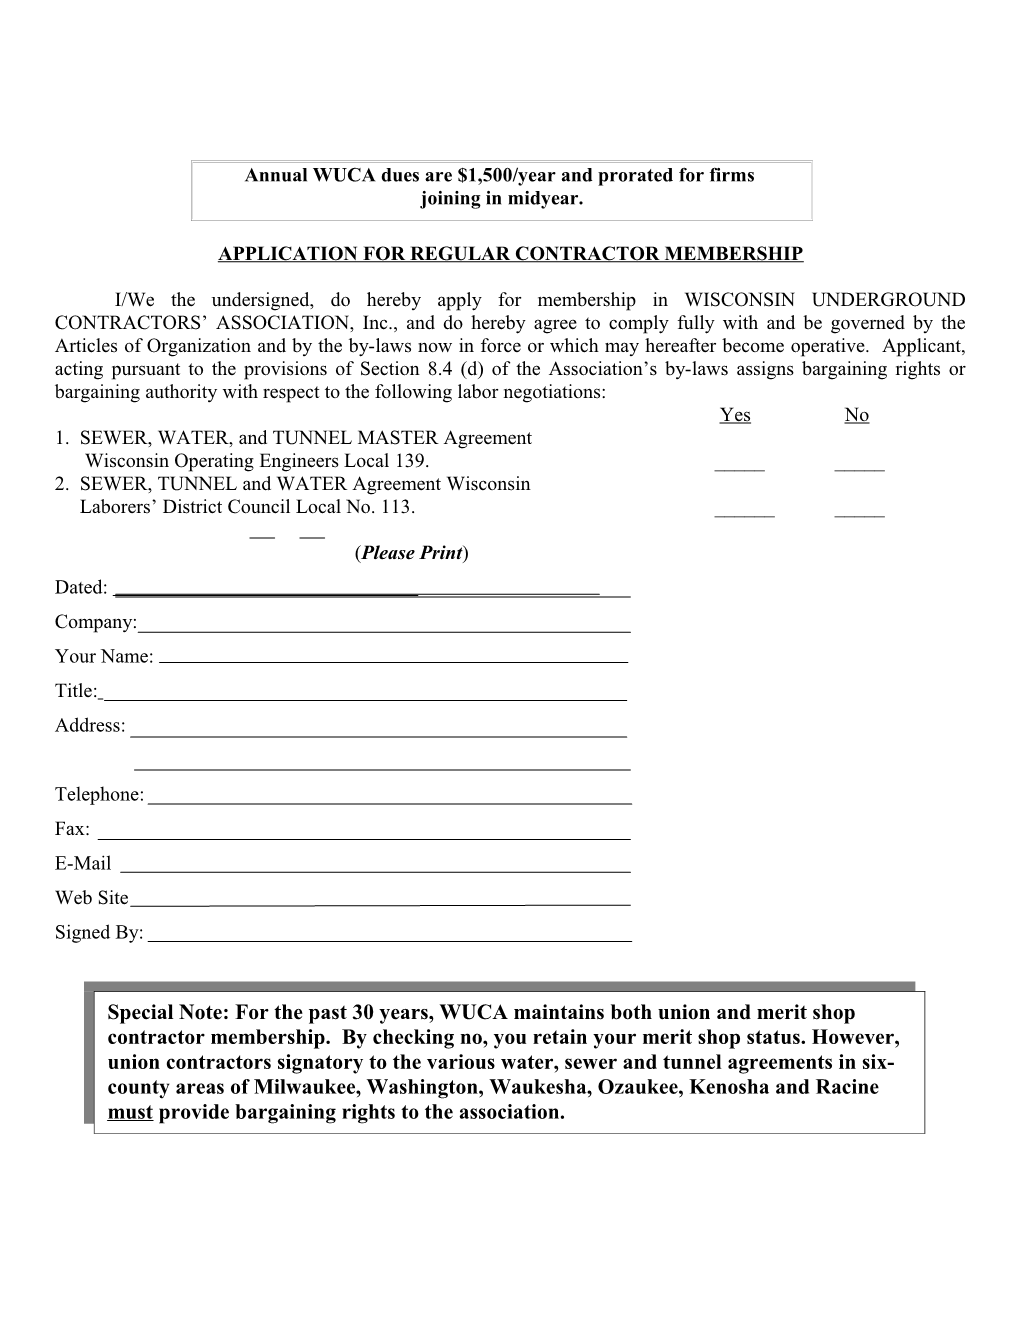 Annual WUCA Dues Are $1,500/Year and Prorated for Firms